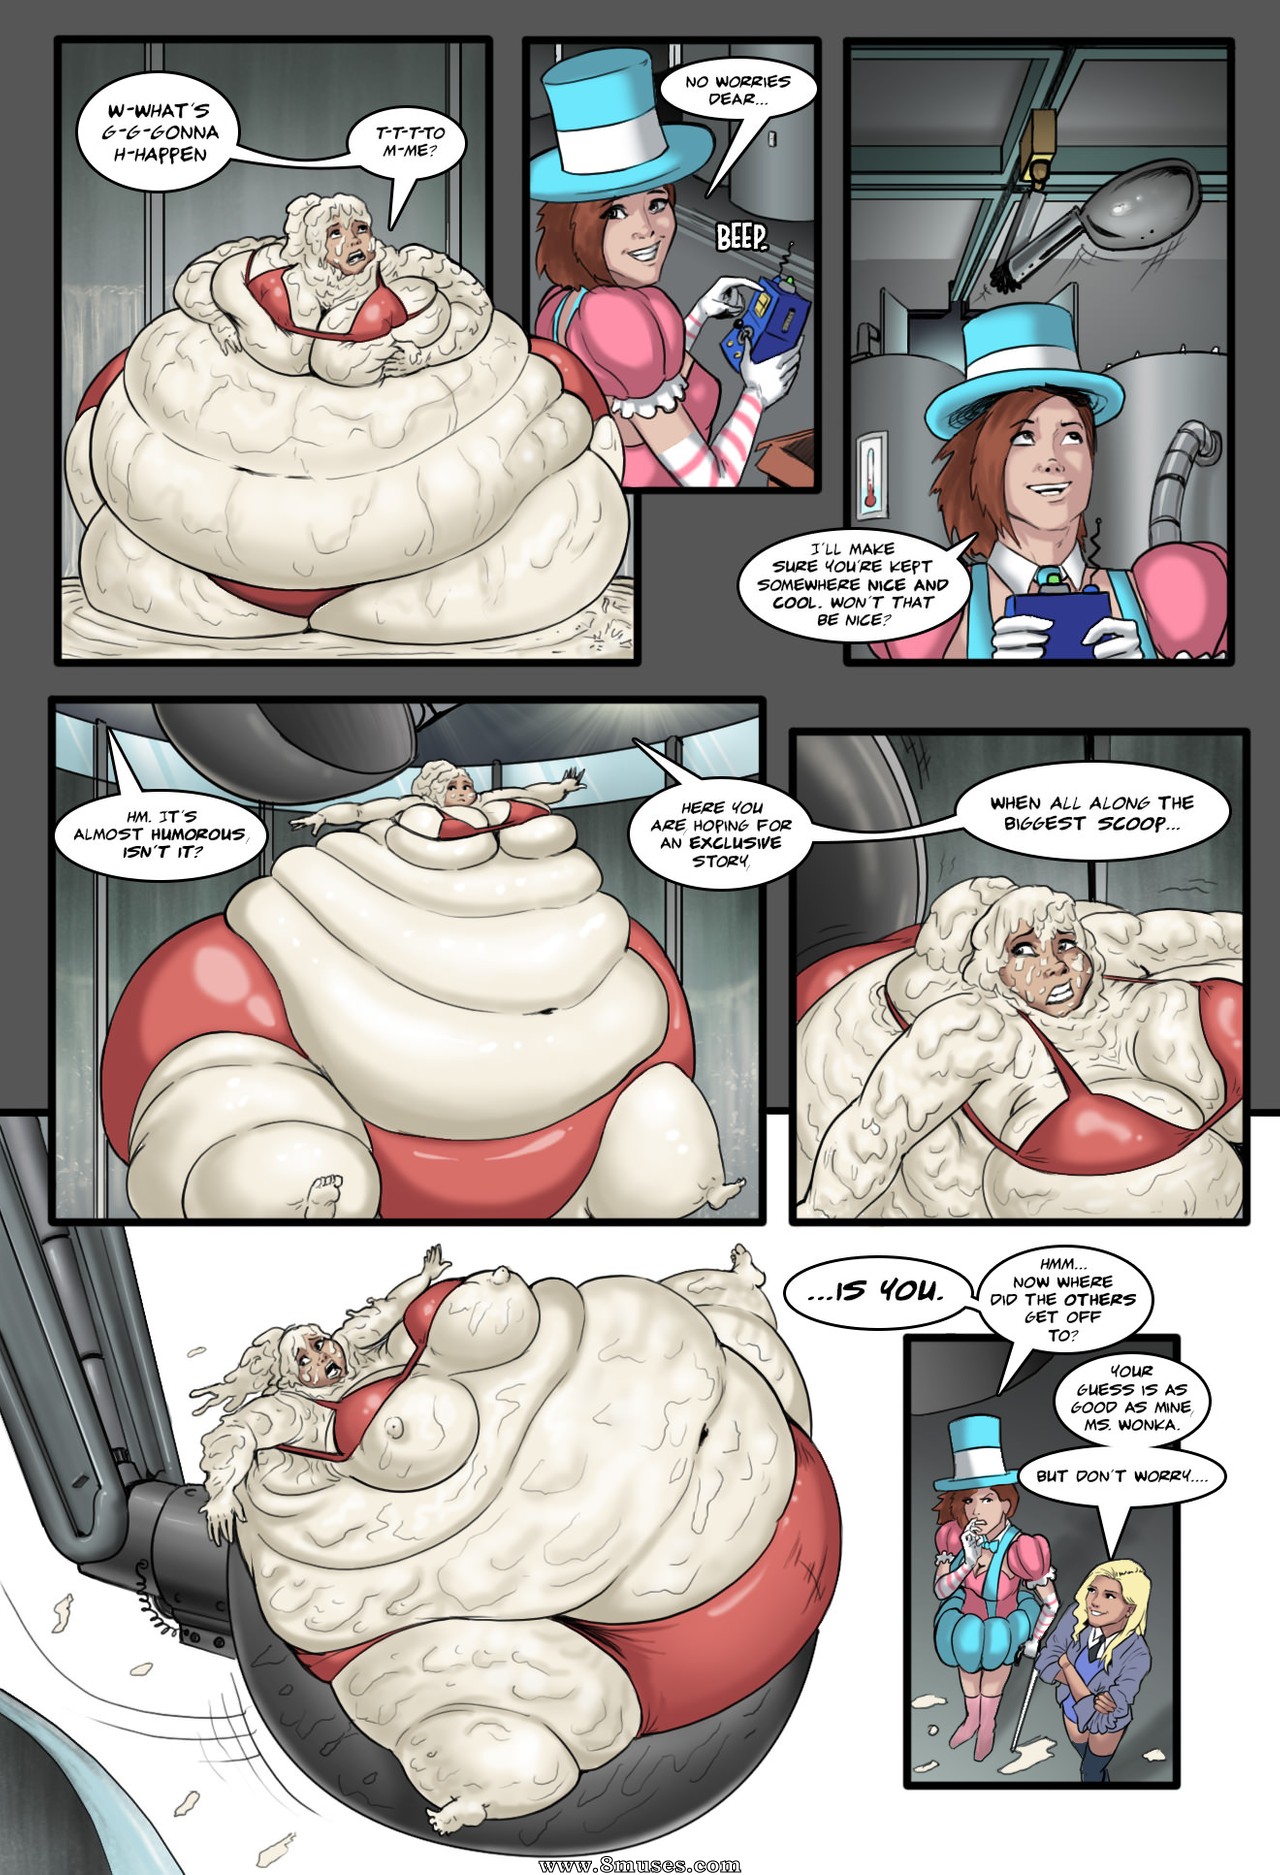 Wendy Wonka and The Chocolate Fetish Factory - 8muses Comics- Free Se...